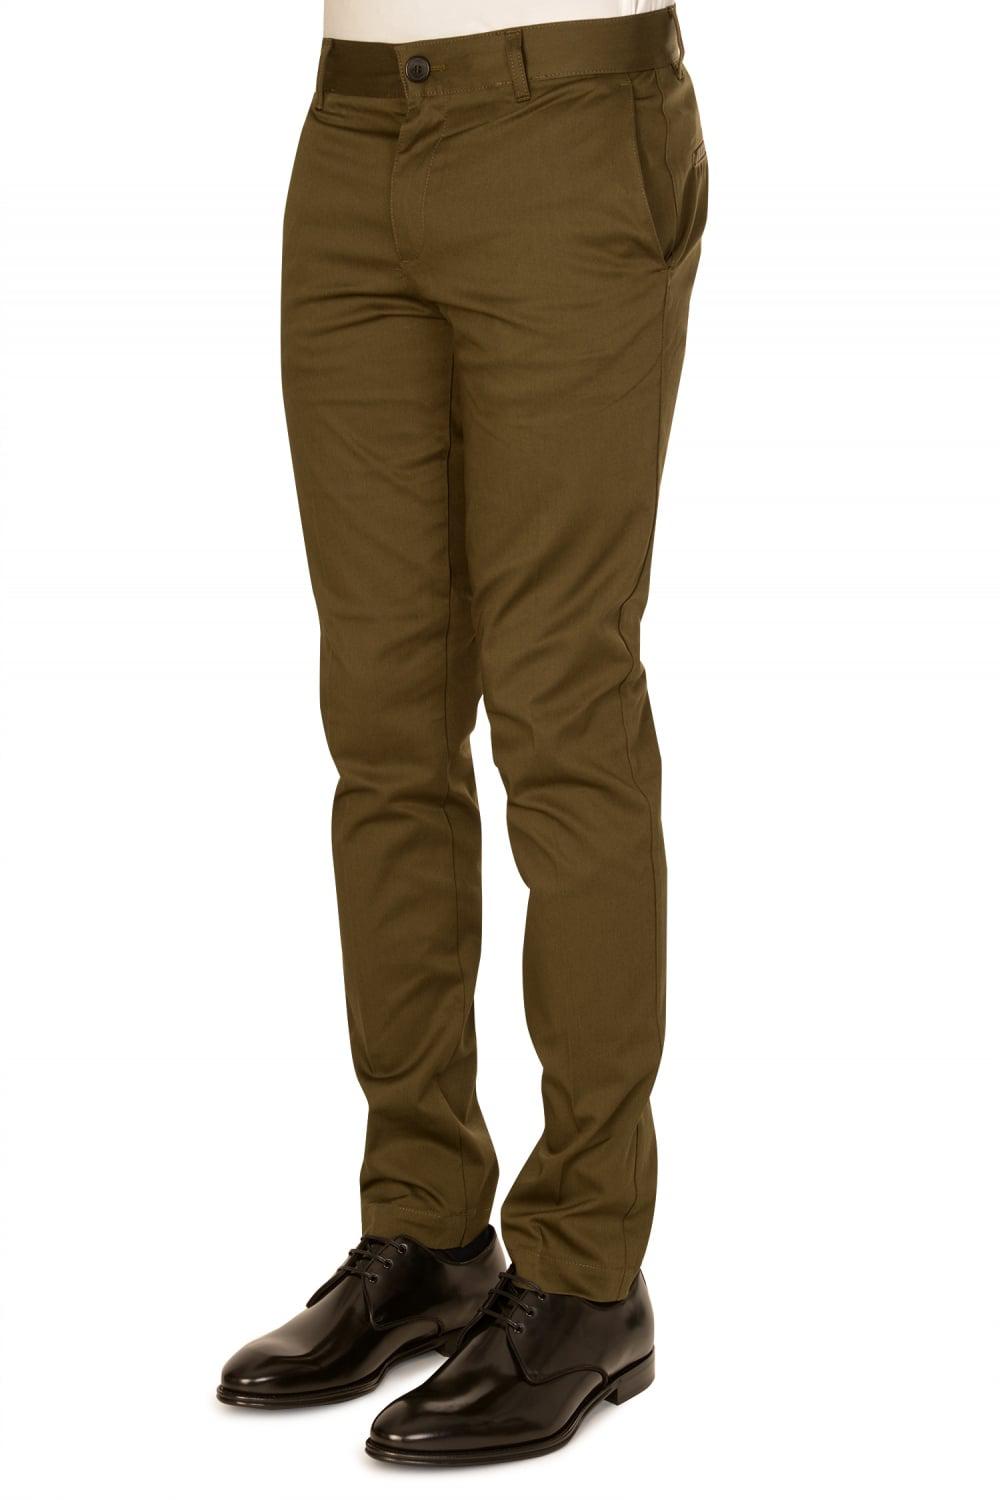 Givenchy Cotton Tapered Trousers Khaki in Natural for Men - Lyst